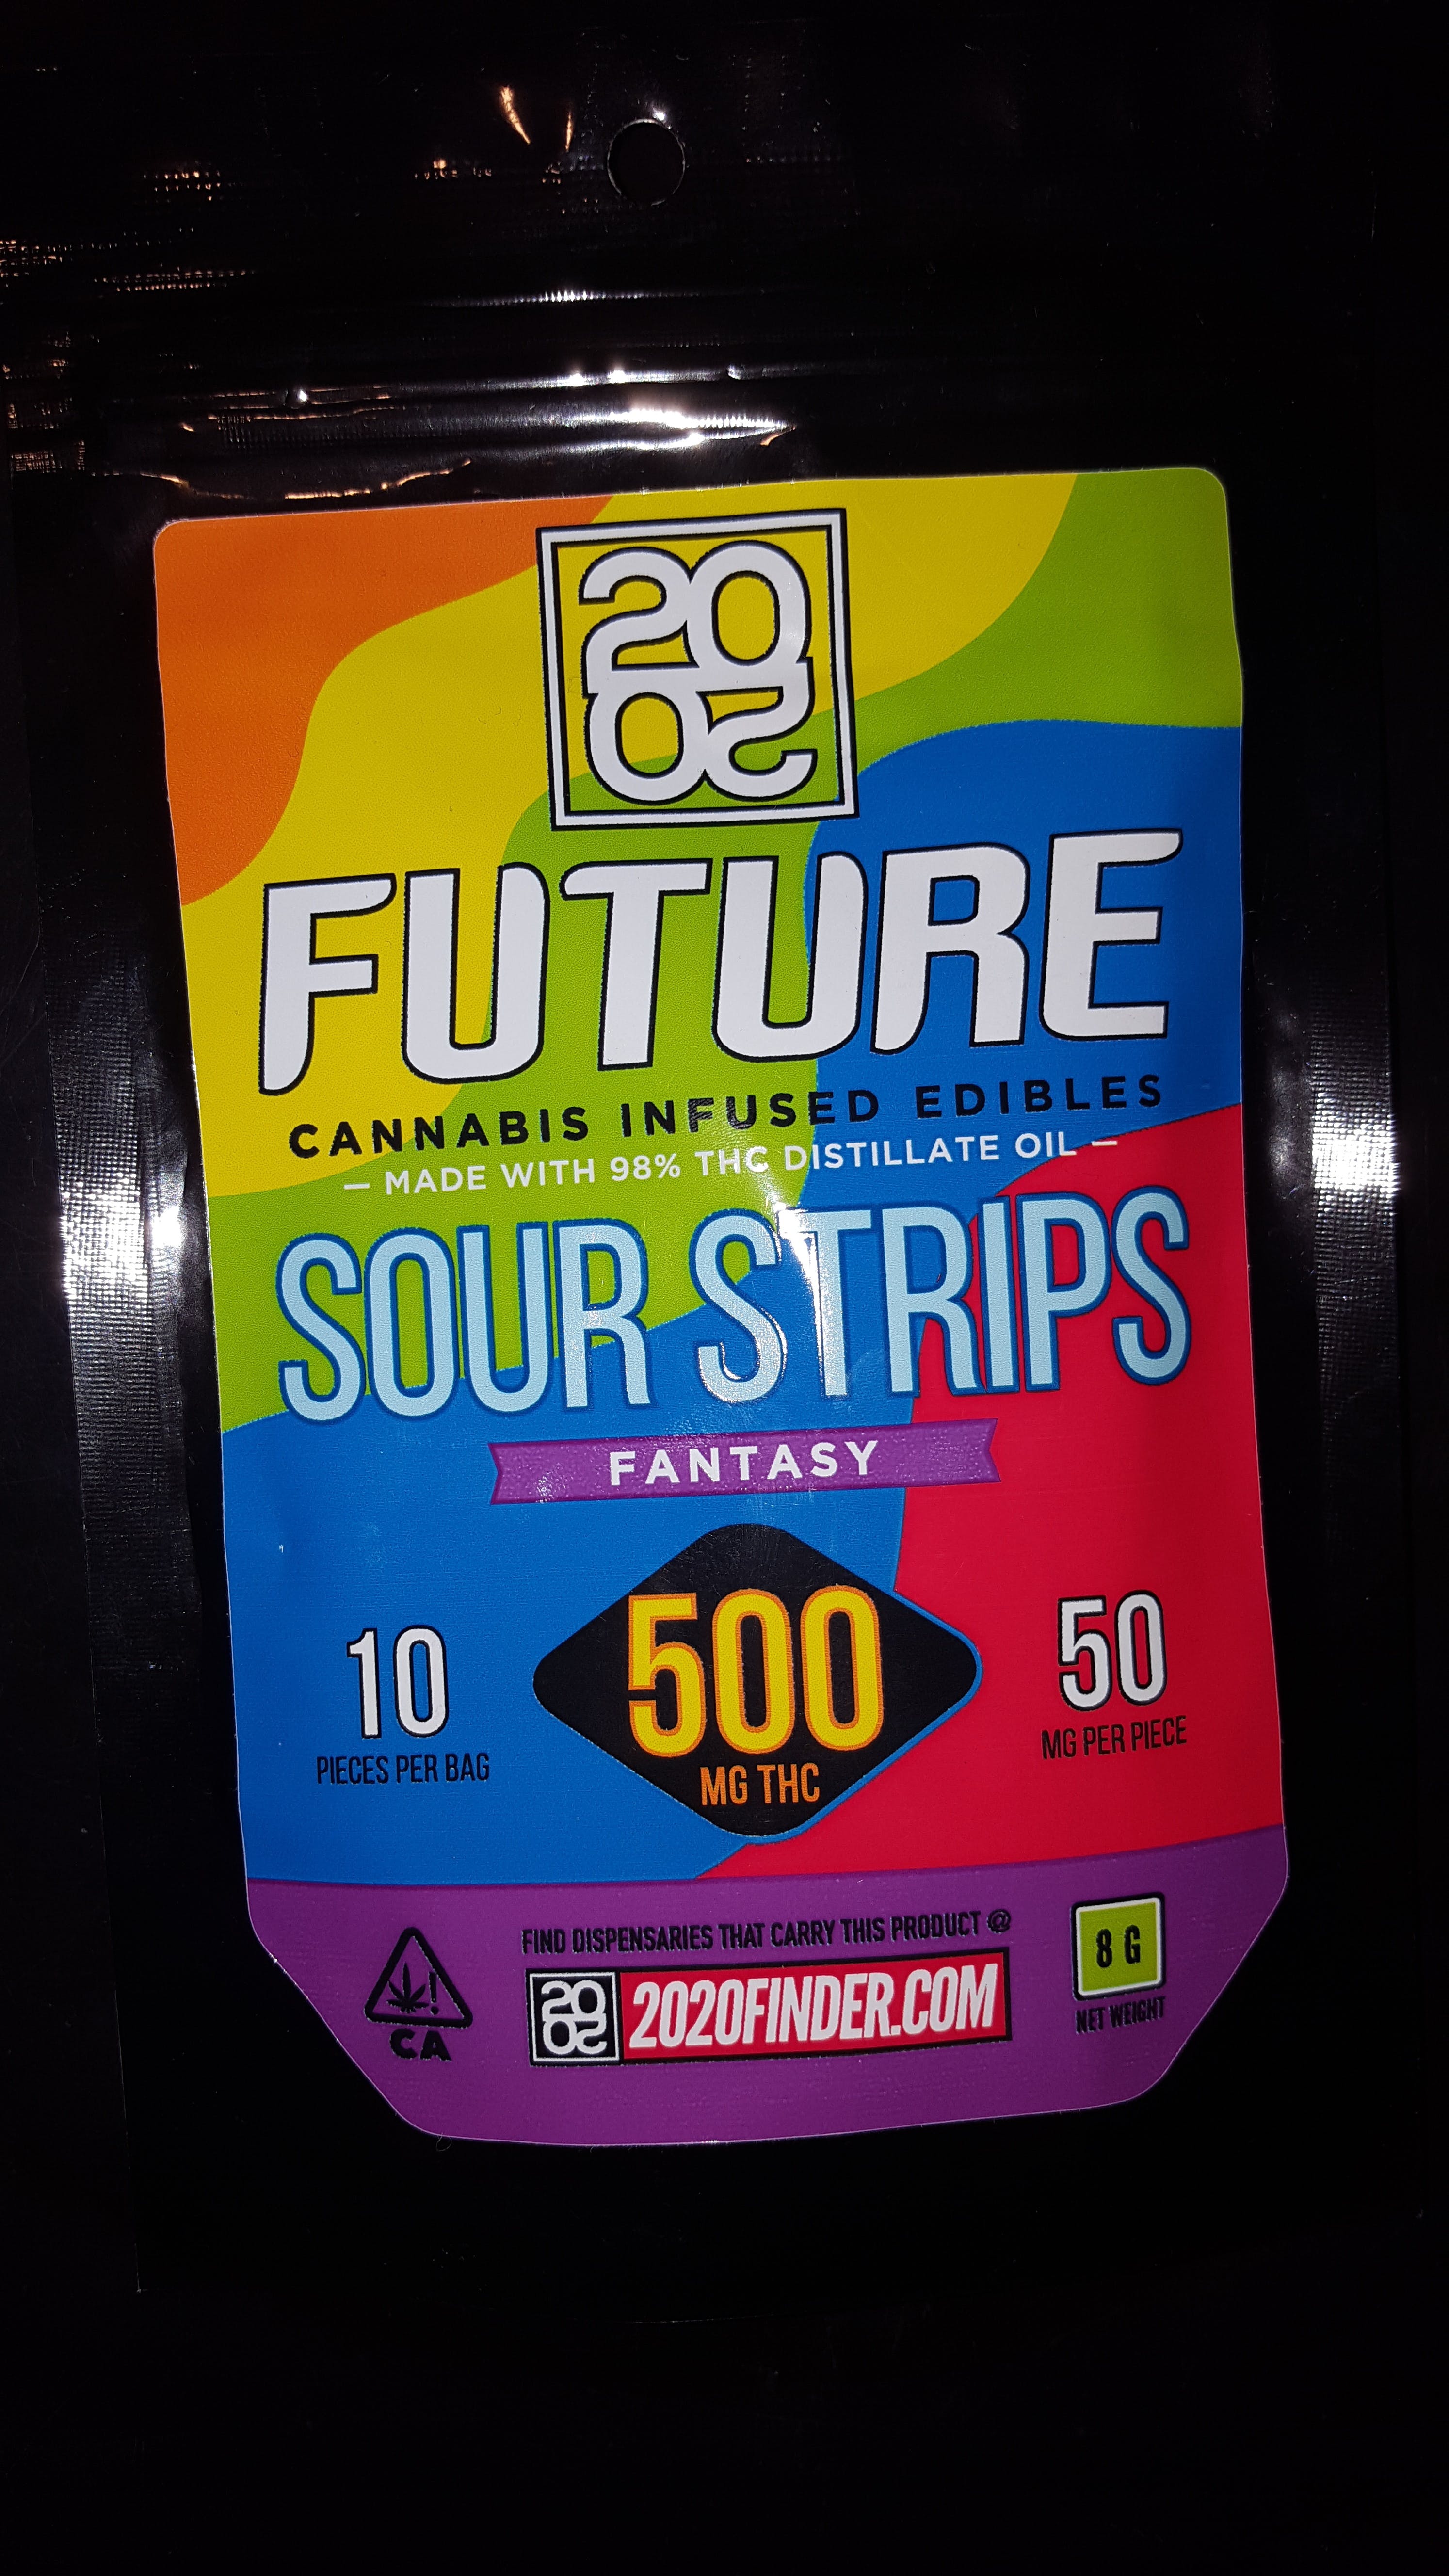 marijuana-dispensaries-8714-vermont-ave-2c-los-angeles-2c-ca-90044-los-angeles-2020-future-cannabis-infused-fantasy-flavored-sour-strips-500mg